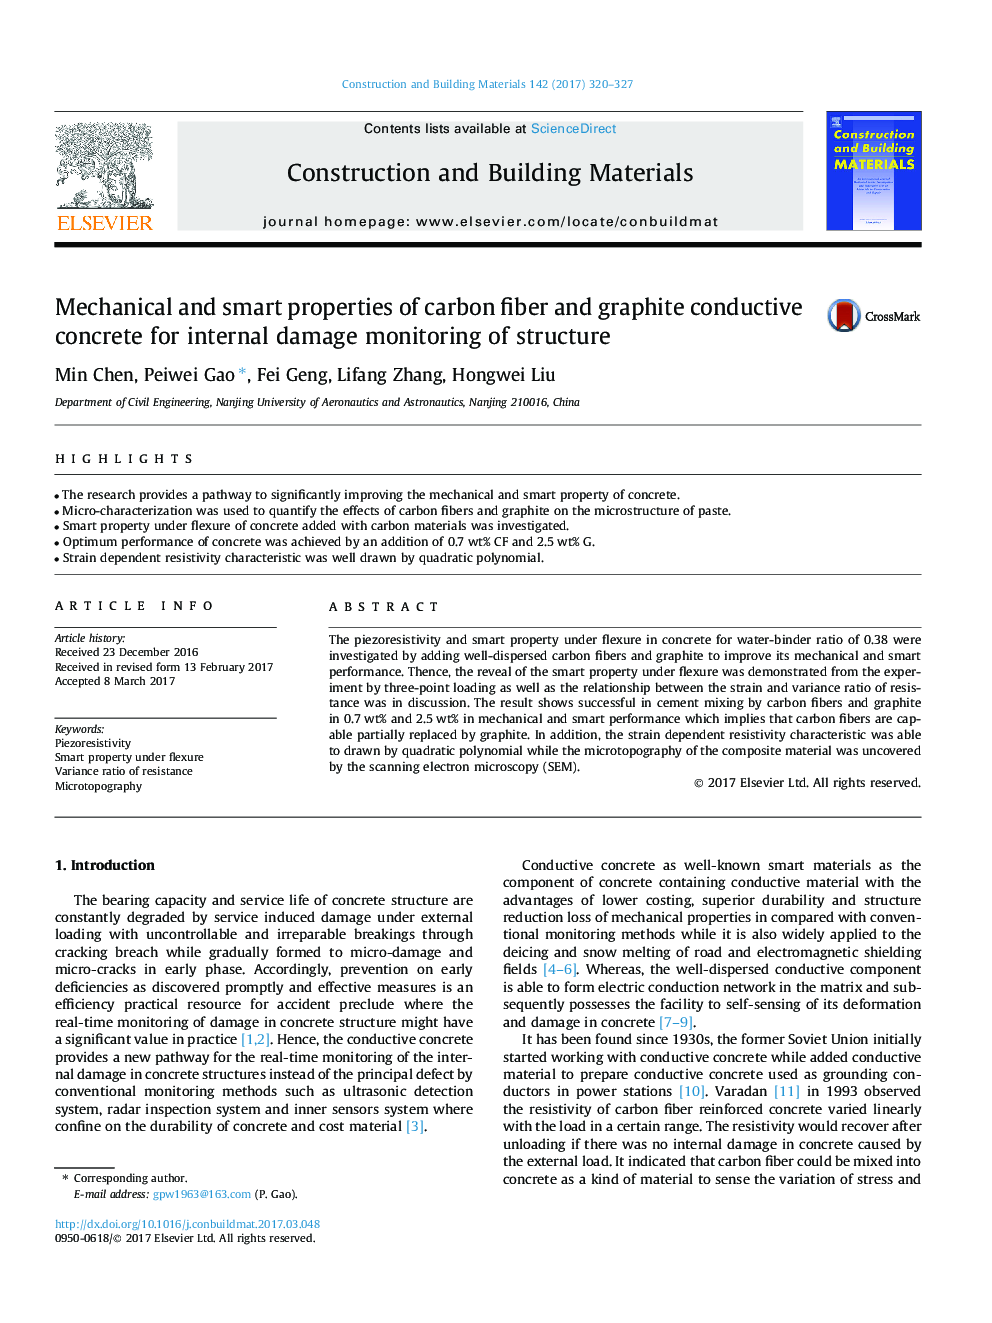 Mechanical and smart properties of carbon fiber and graphite conductive concrete for internal damage monitoring of structure